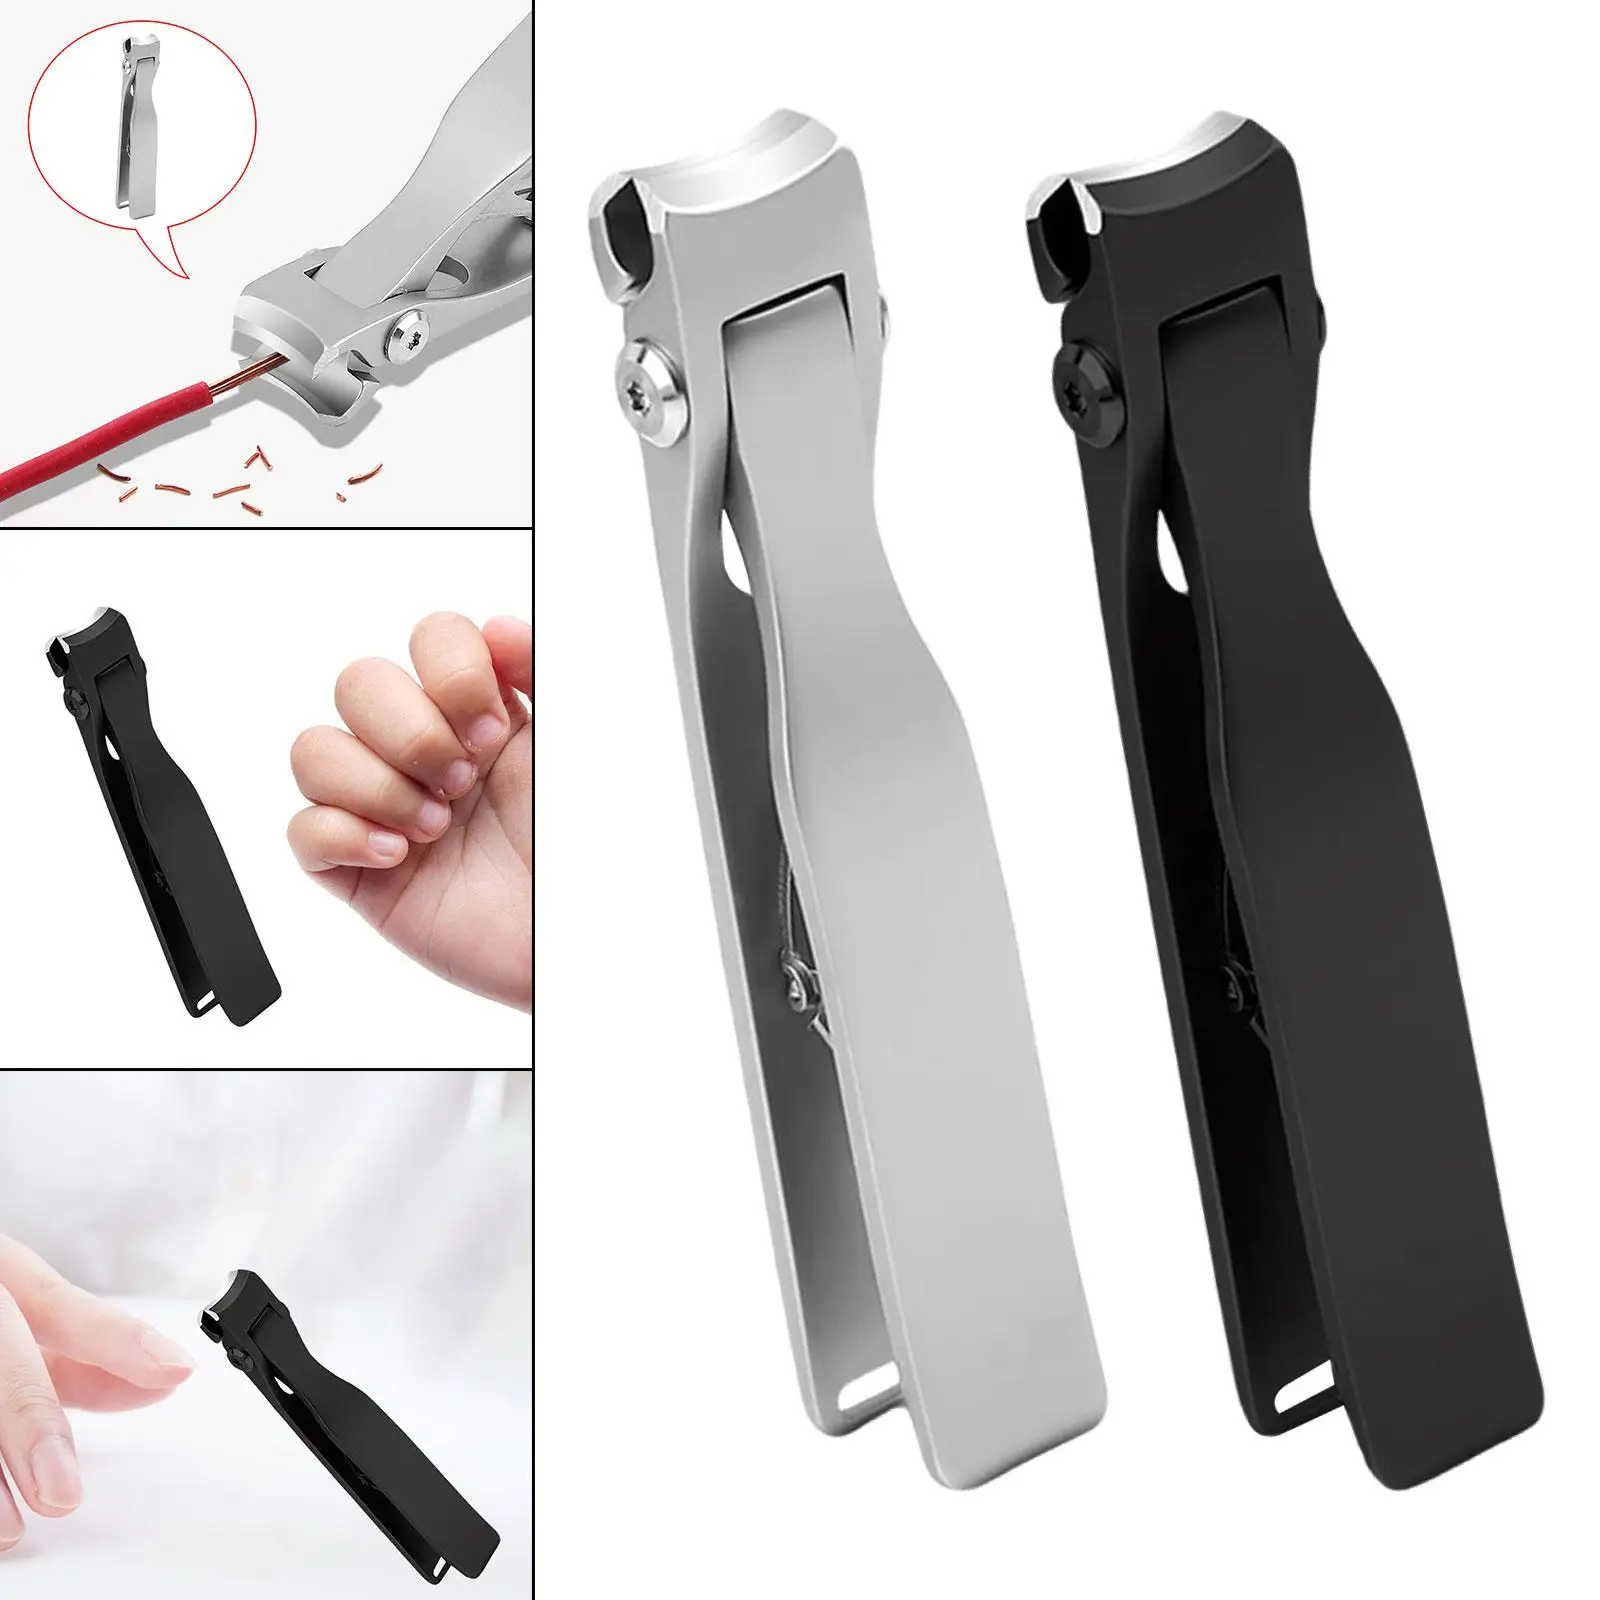 Toe Nail Clippers Nail Trimmer Sharp Sturdy Wide Opening Fingernail & Toenail Clippers Nail File for Seniors, Adult, and Kids